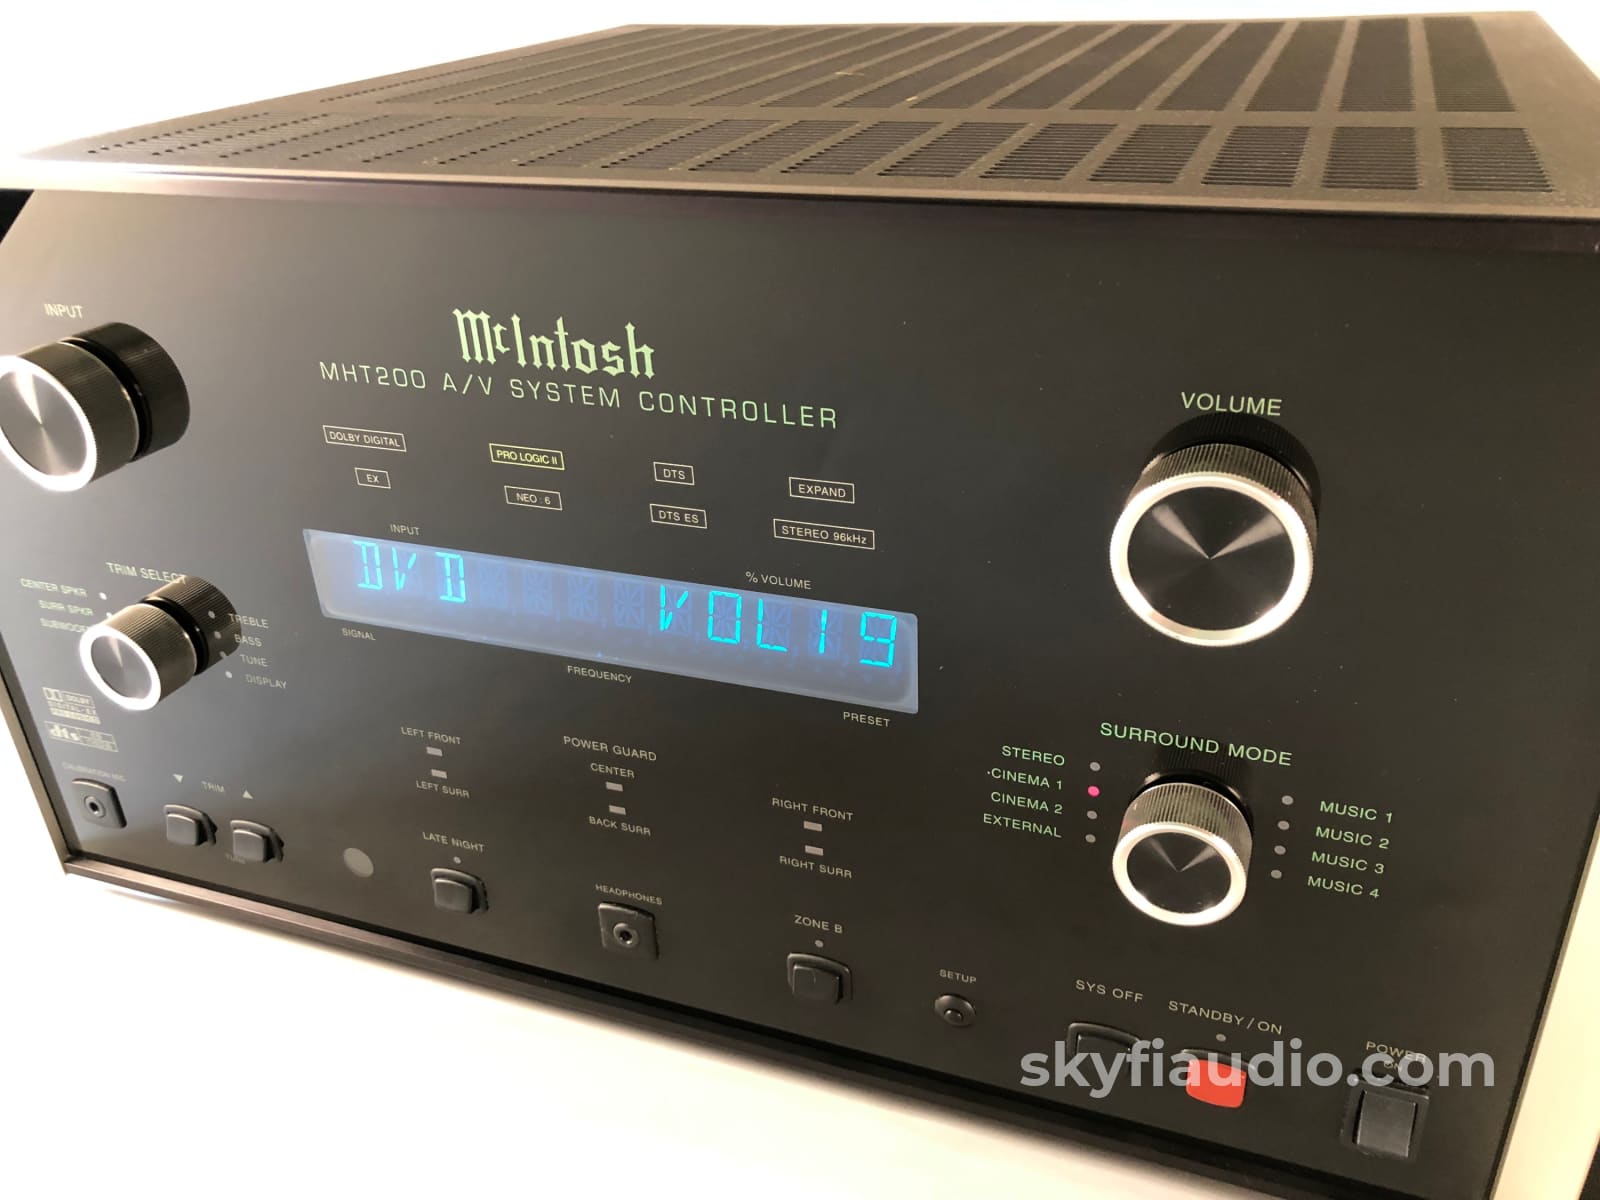 Mcintosh Mht200 Home Theater Receiver - Fully Serviced Integrated Amplifier